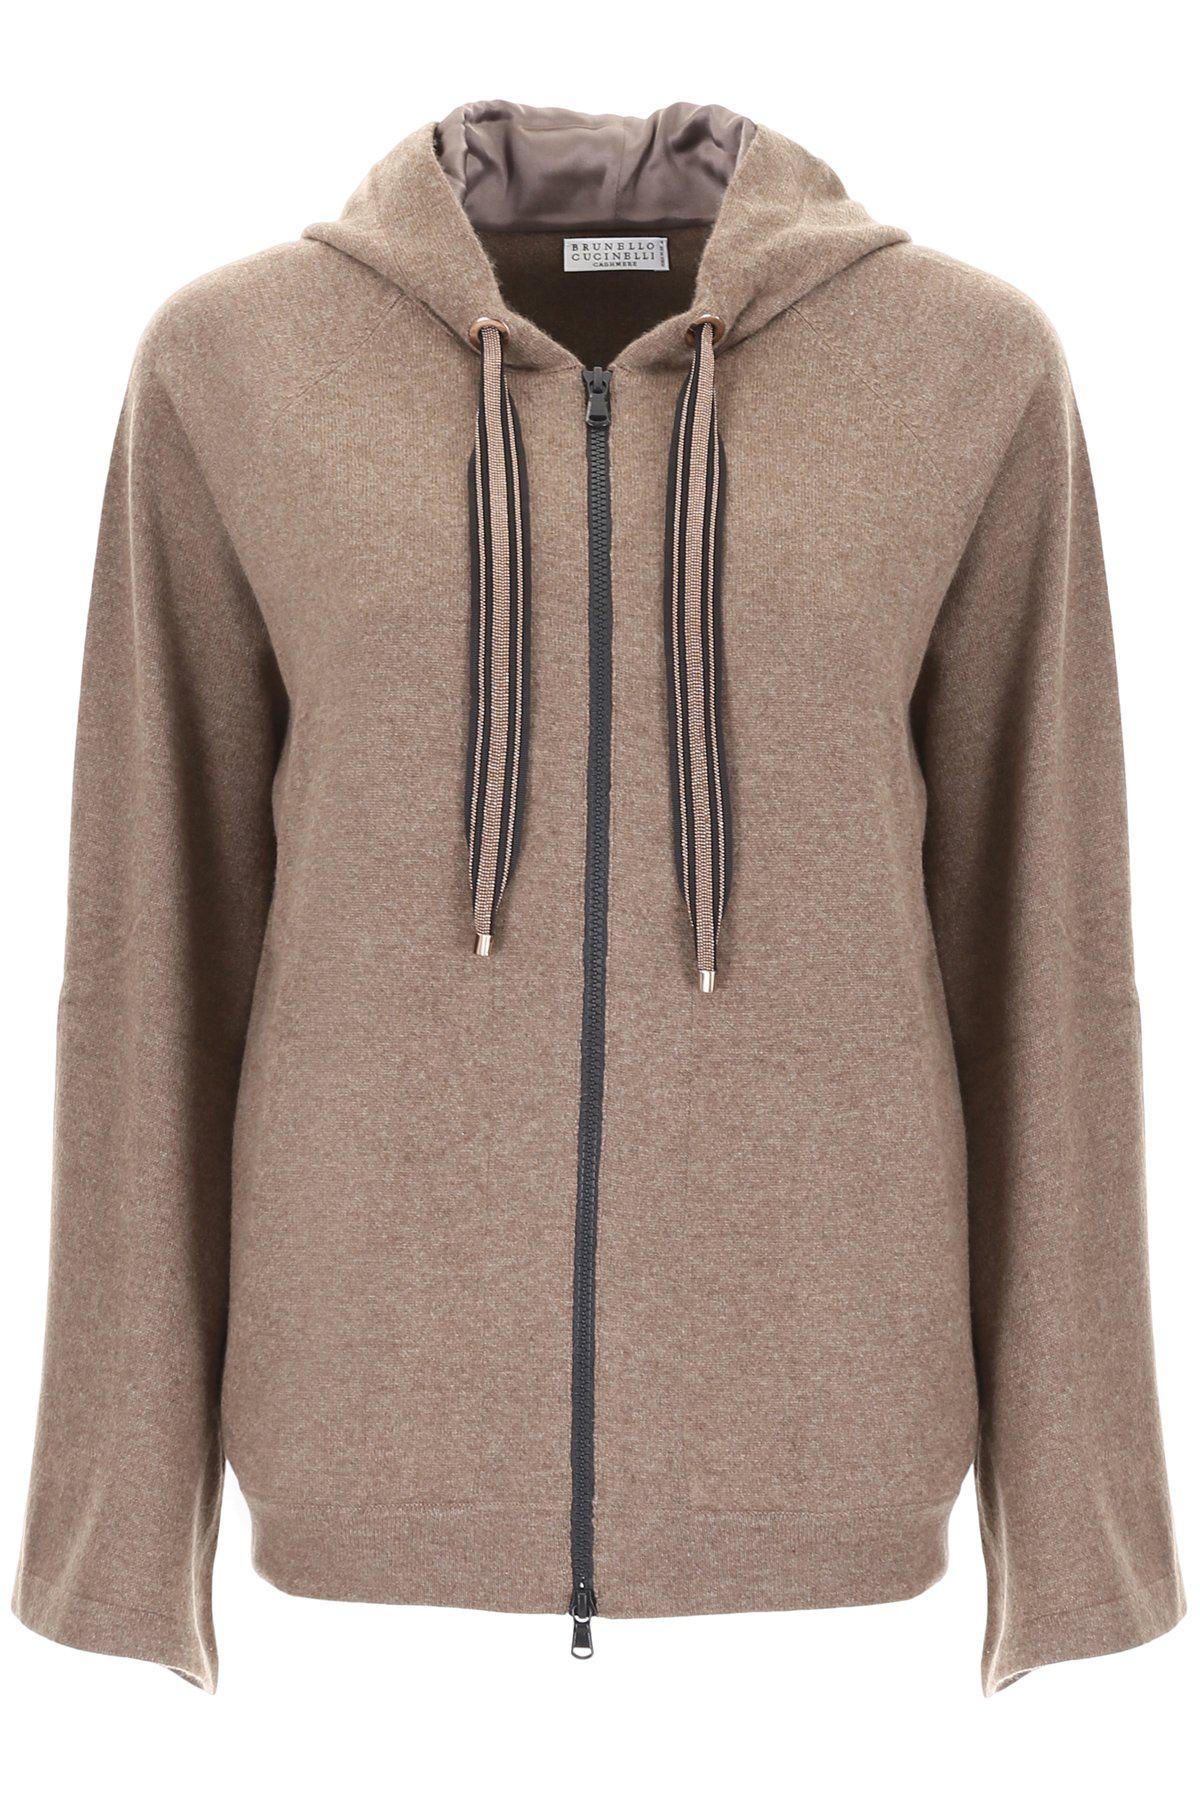 Lyst - Brunello Cucinelli Oversized Sleeves Zipped Hoodie in Brown